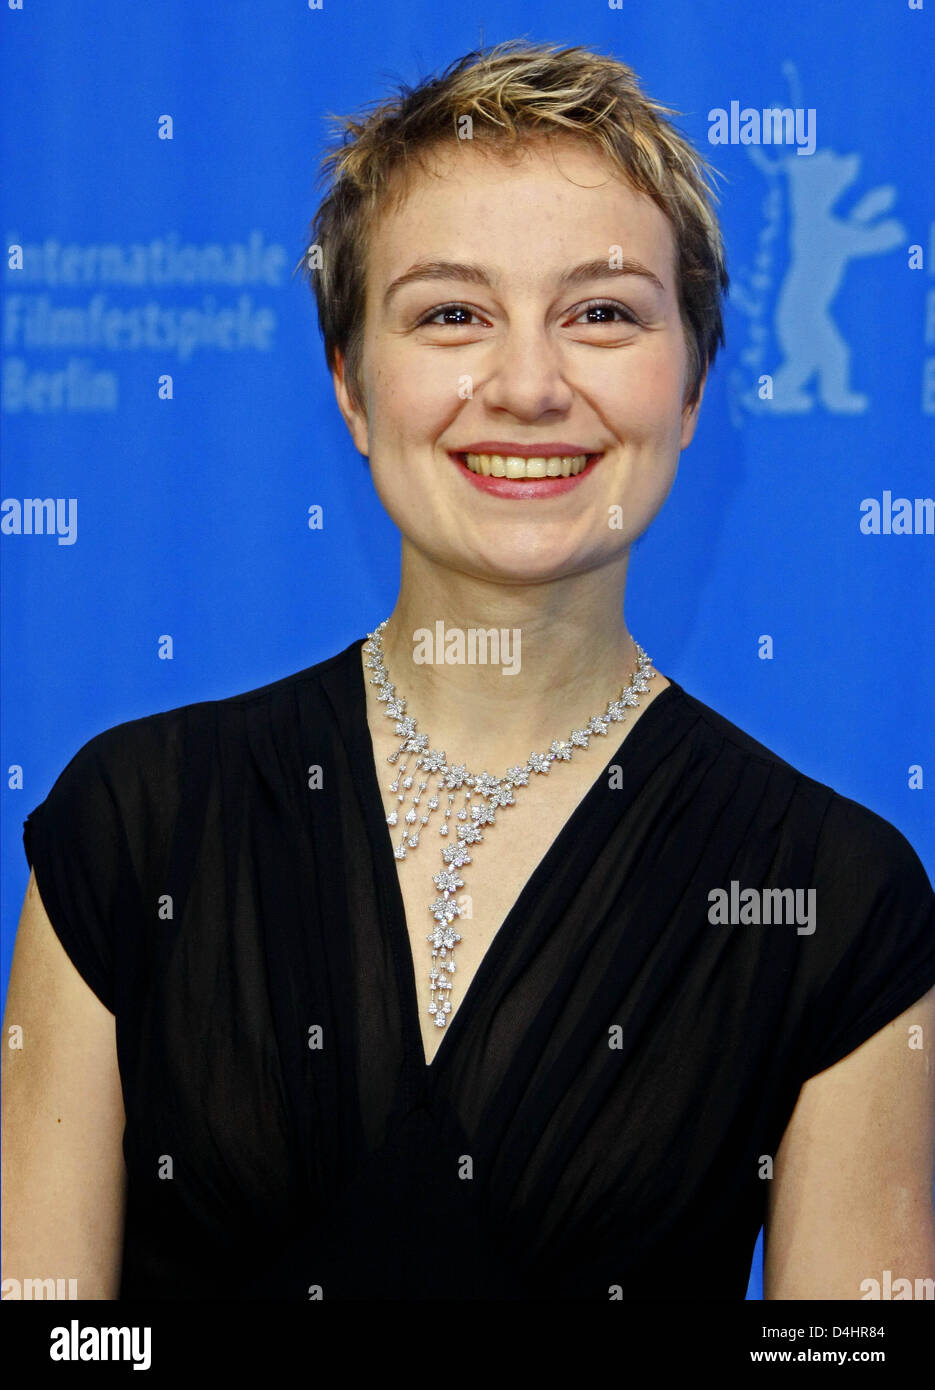 Romanian actress Anamaria Marinca smiles during a photo call on her film ?Storm? at the 59th Berlin International Film Festival in Berlin, Germany, 07 February 2009. The film runs in Competetition, a total of 18 films compete for the Silver and Golden Bears of the 59th Berlinale. Photo: Hubert Boesl Stock Photo